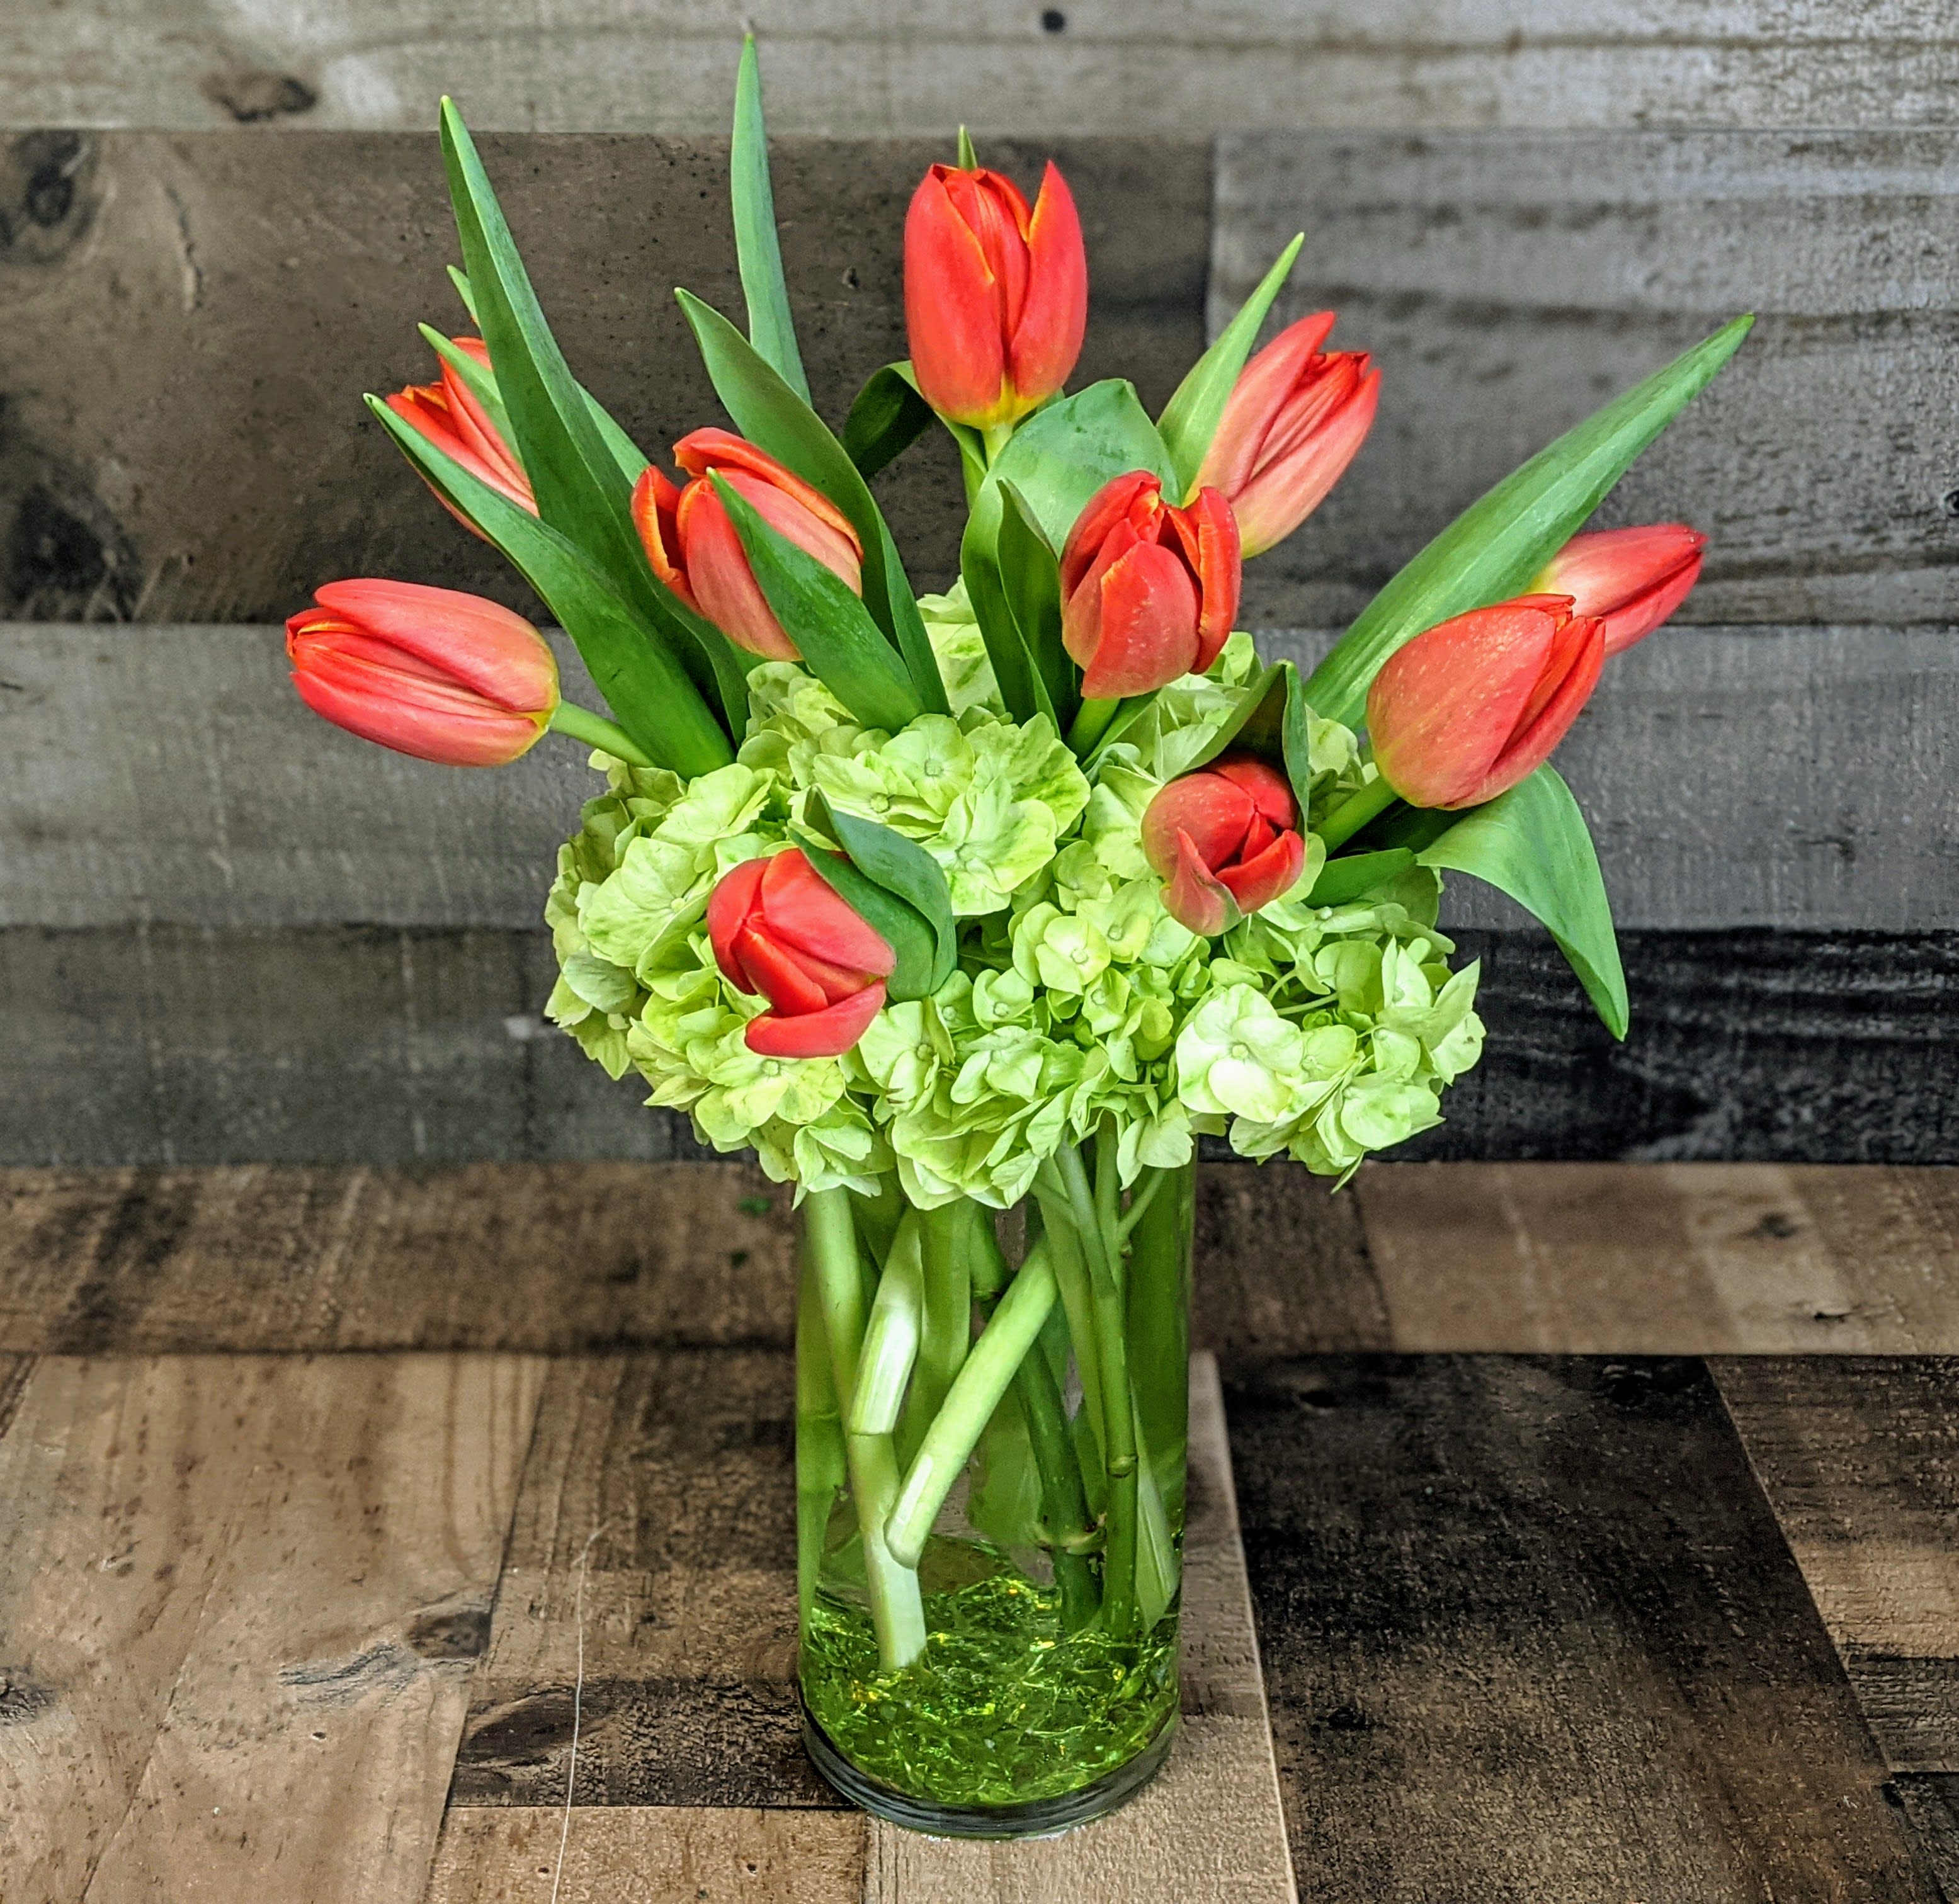 Tulip Special (all colors may vary due to availability) - Shown as Standard Ten tulips come nestled in a hydrangea arranged in a clear cylinder vase. **Colors will vary due to availability** *We custom design this arrangement and use the freshest flowers available the day of delivery.*